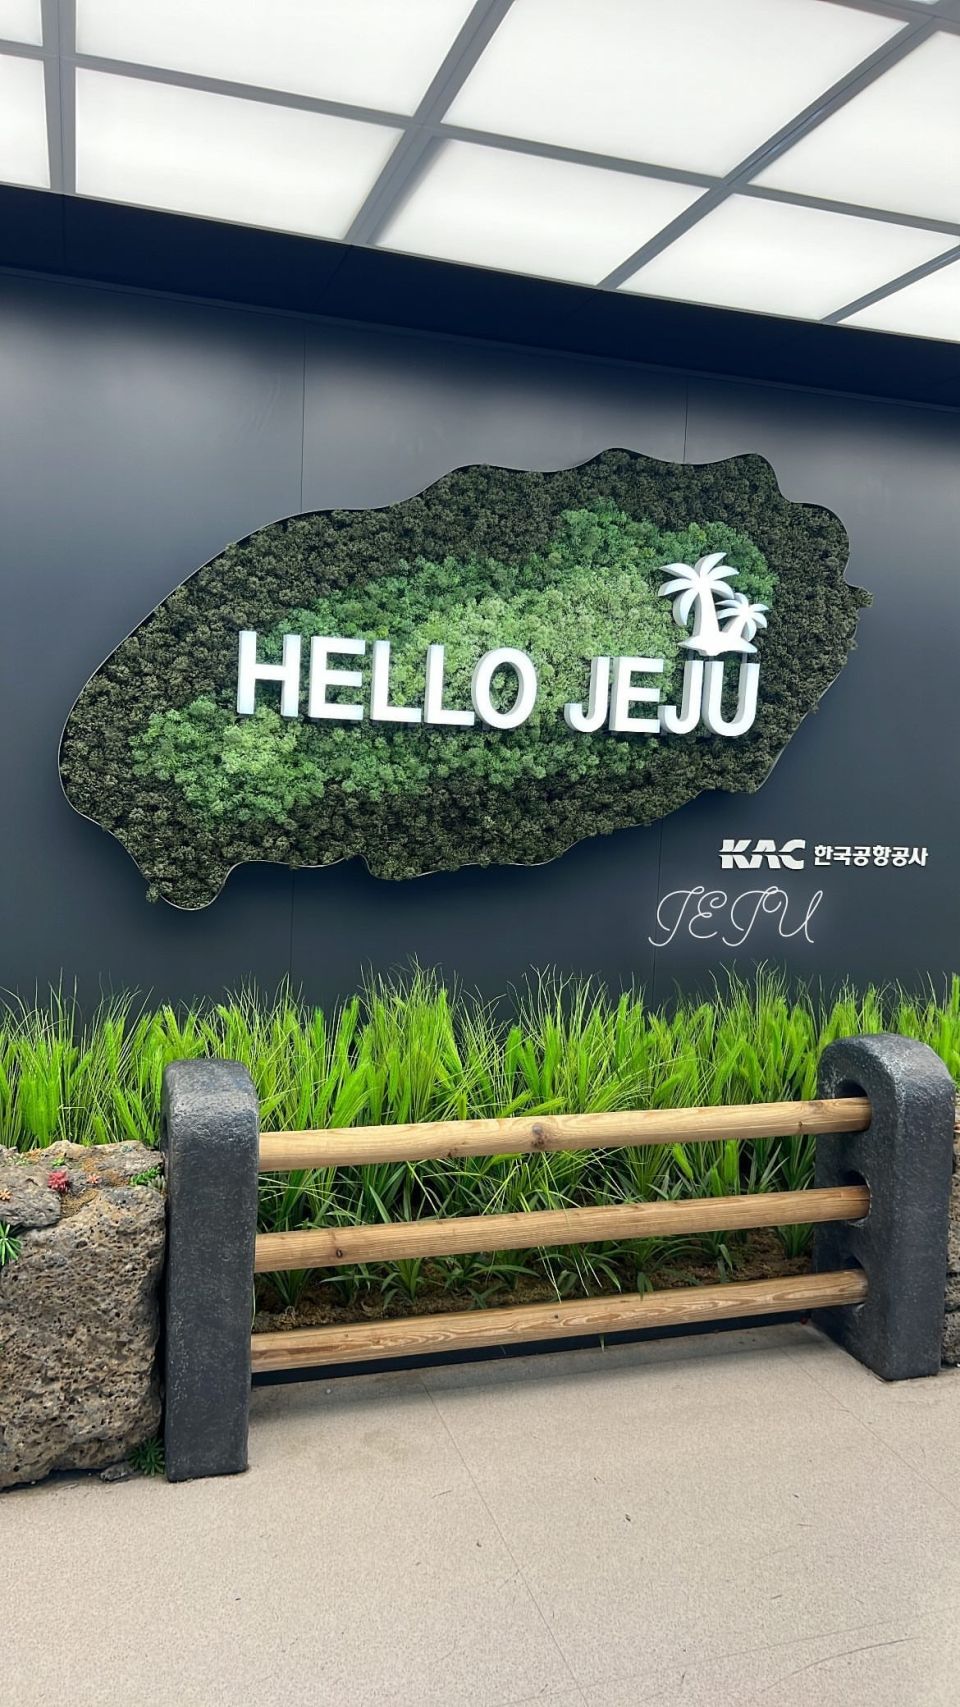 Photo for blog post Adventures in Jeju!